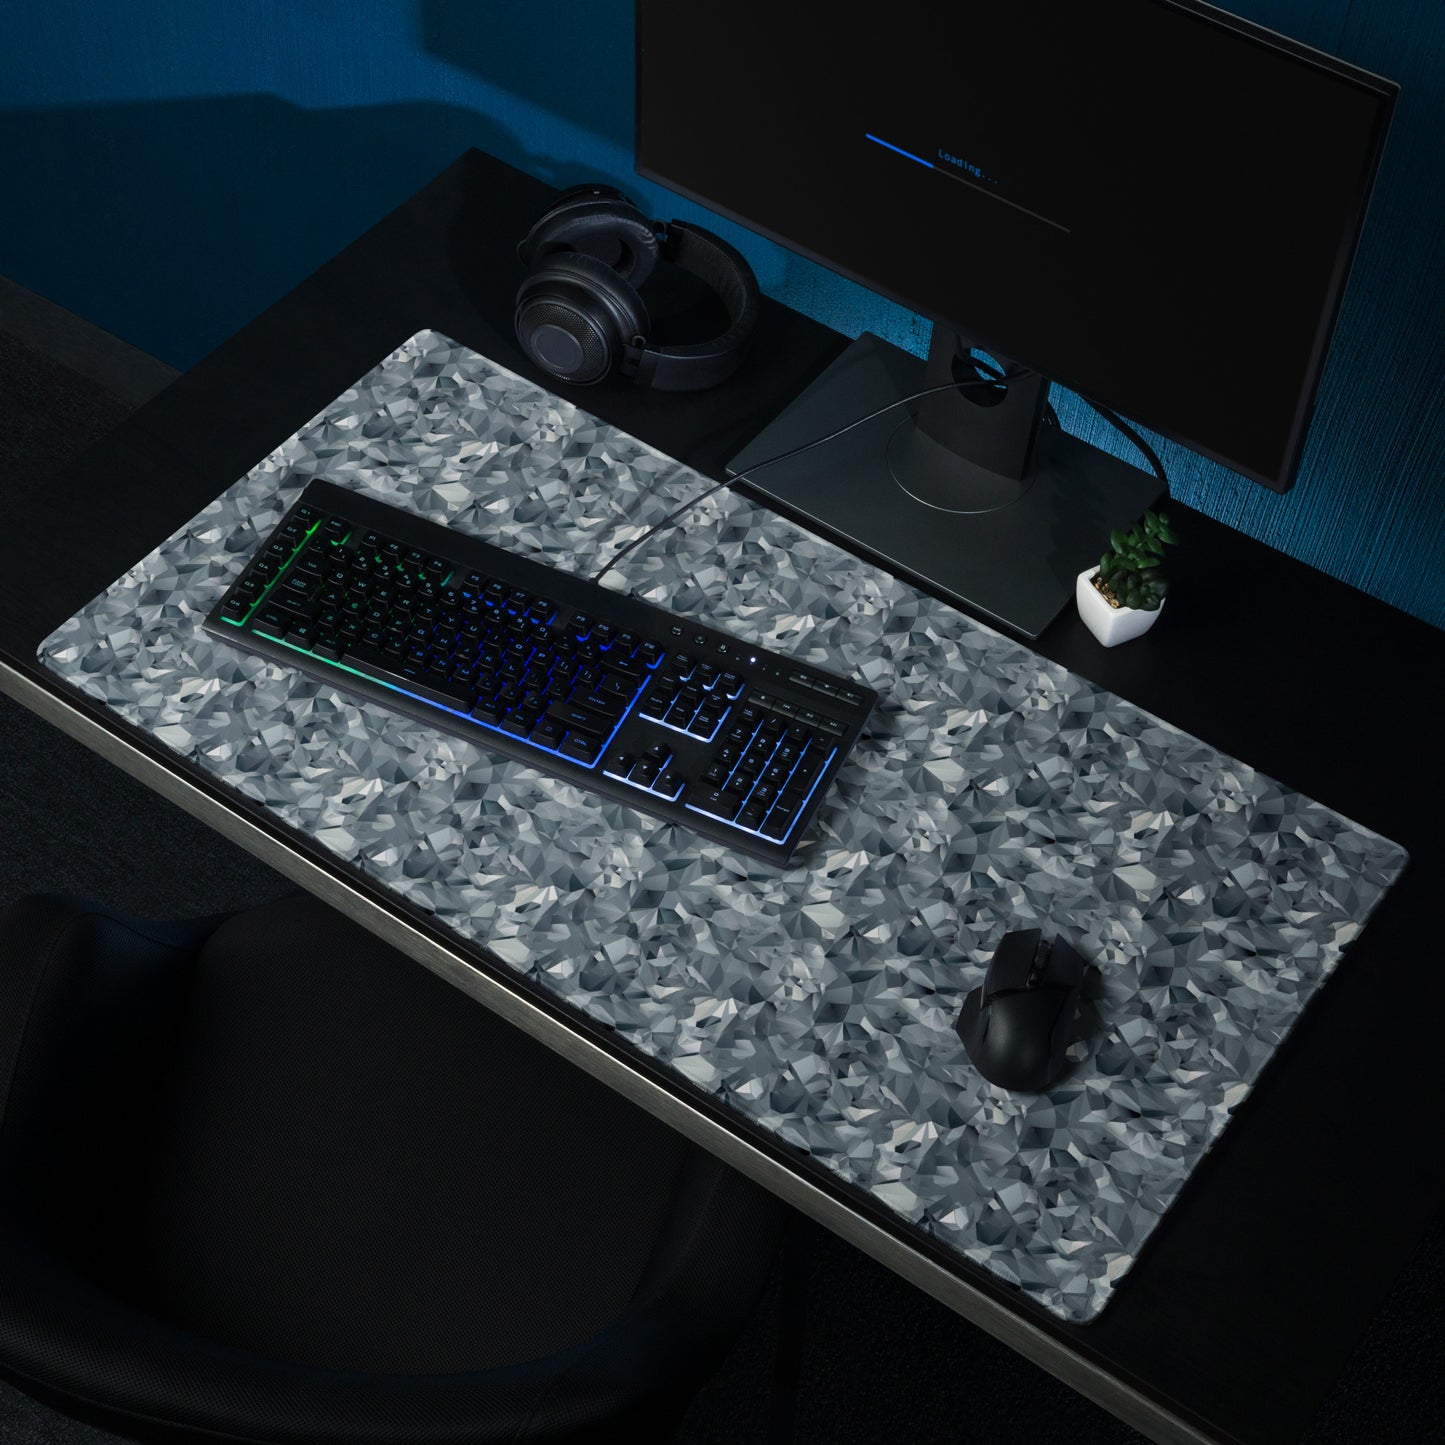 A 36" x 18" gaming desk pad with gray crystals. It sits on a black desk with a monitor, keyboard, and mouse.